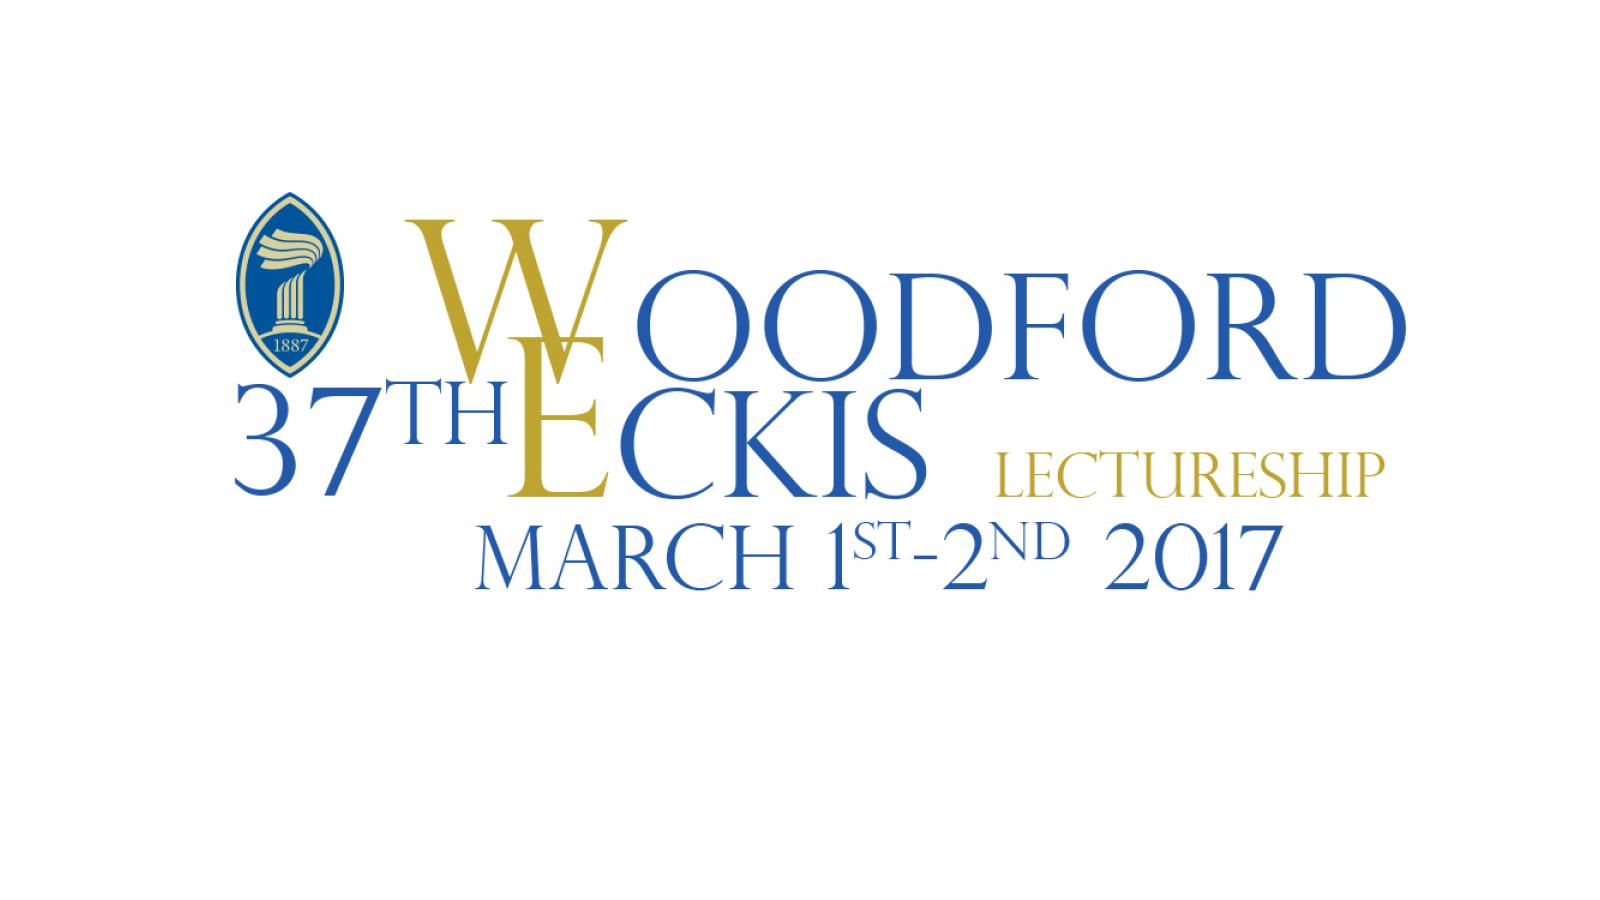 37th Annual Woodford-Eckis Lectureship